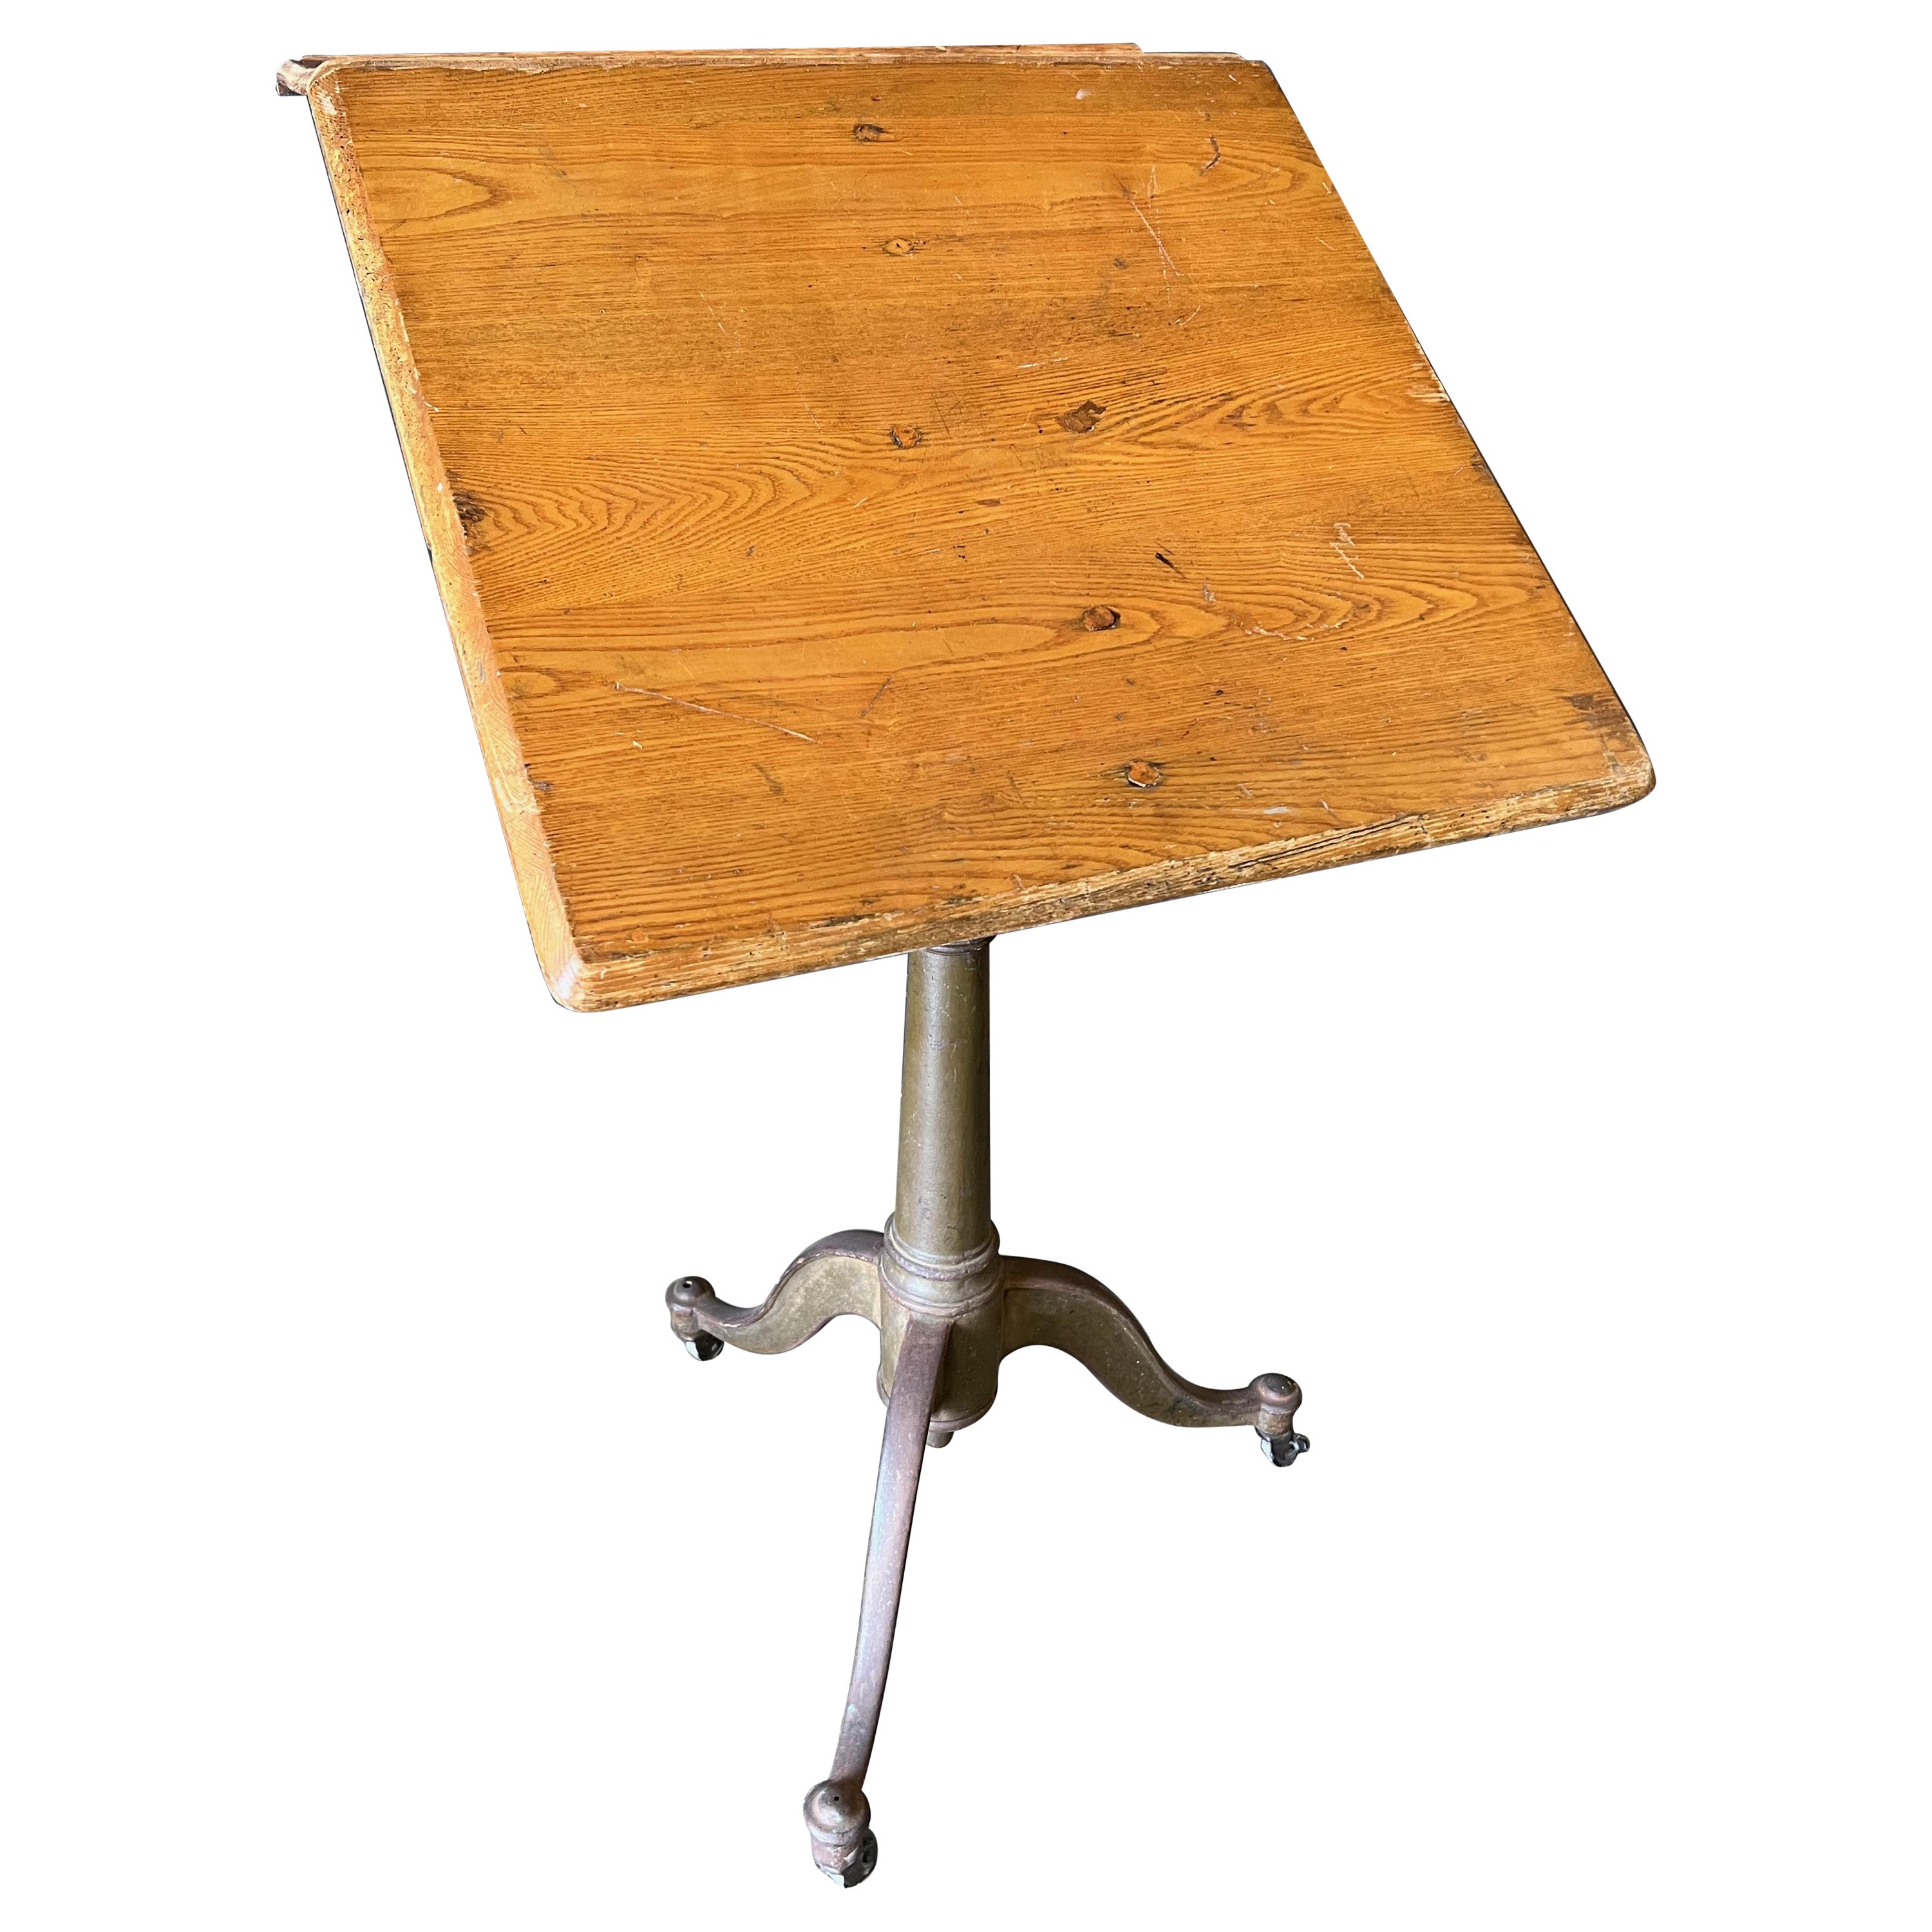 Are drafting tables adjustable for height?